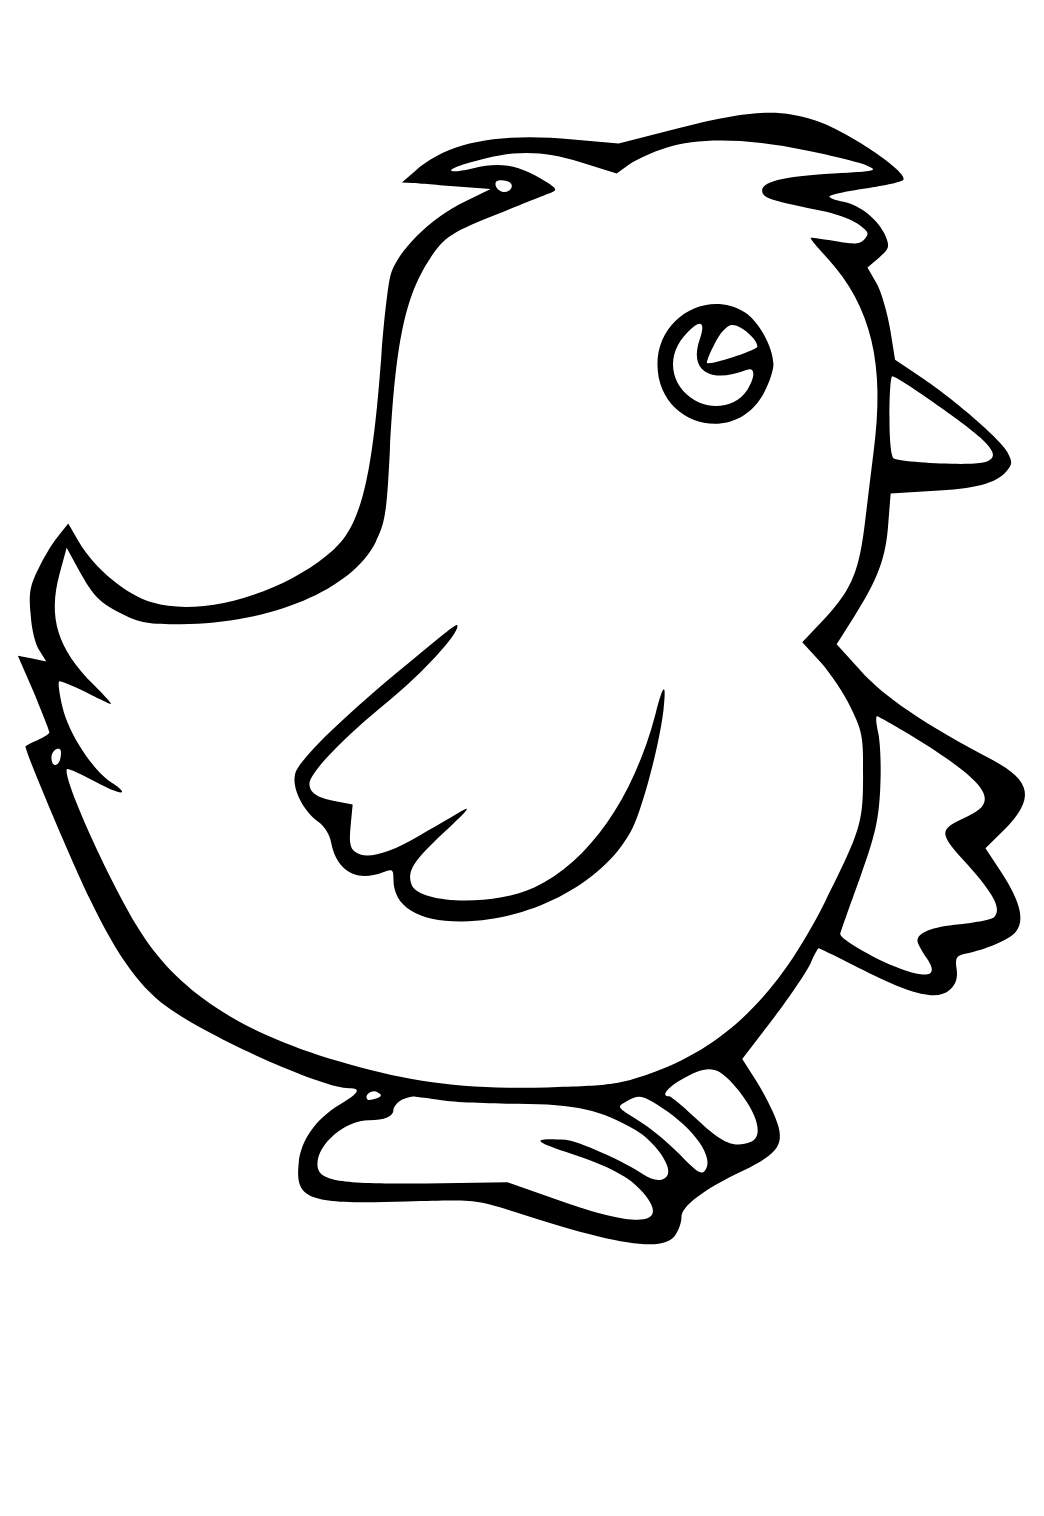 Free printable chicken easy coloring page for adults and kids